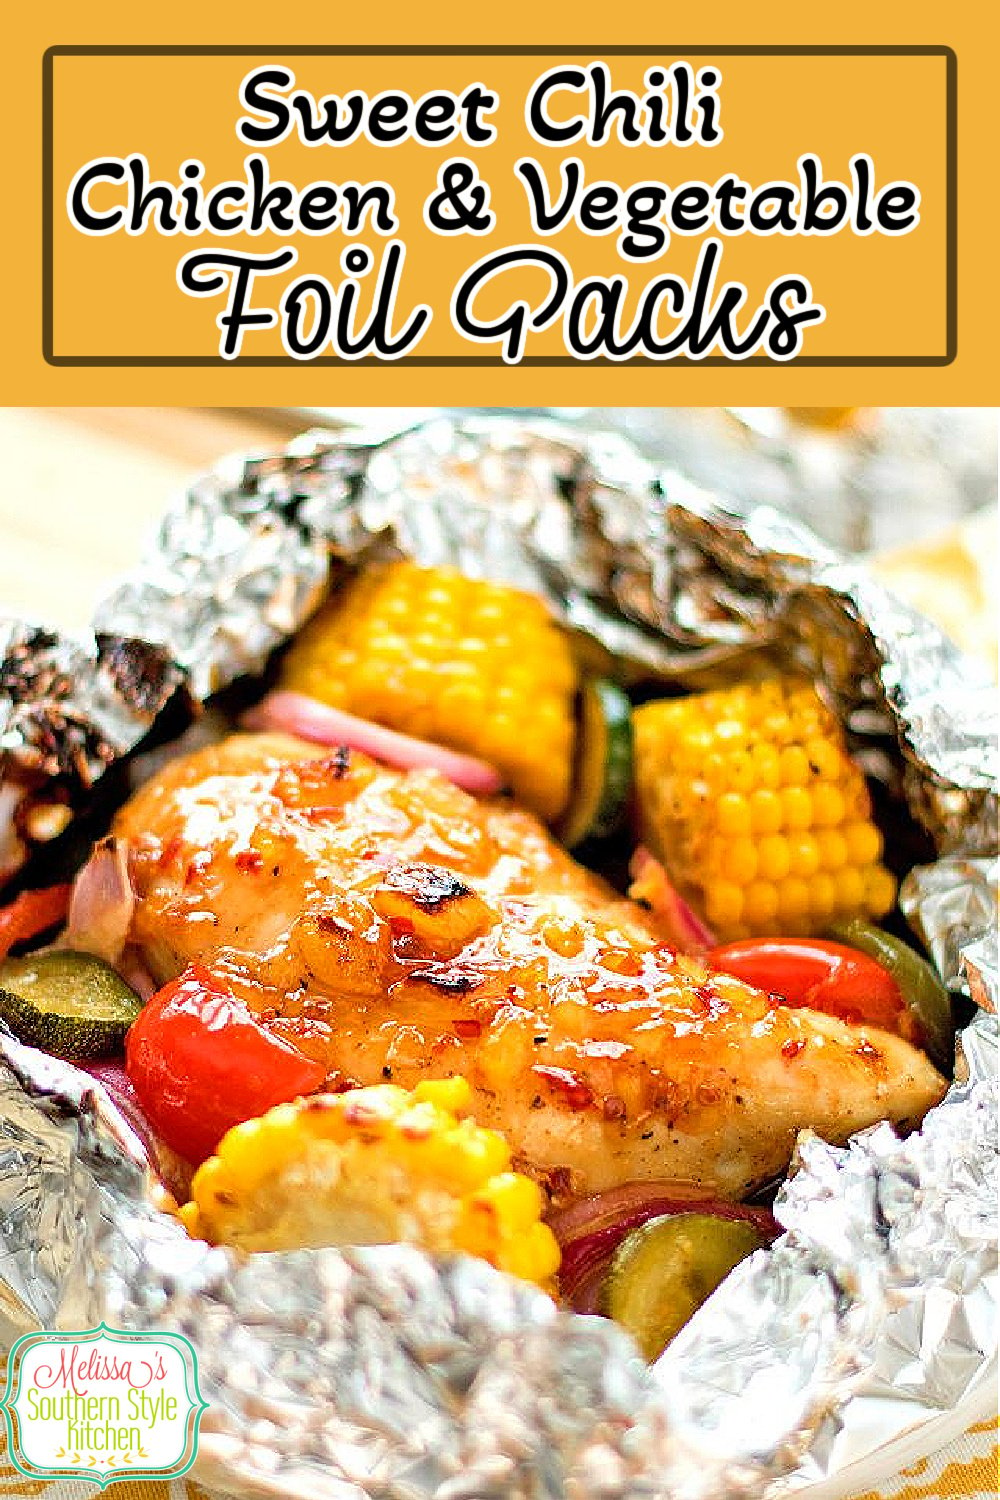 Make this sweet and spicy chicken foil packs for an all-in-one meal with easy clean-up, too! #chickenrecipes #chickenbreastrecipes #healthyfood #dinnerideas #foilpacks #campfiremeals #chicken #chili #southernfood #southernrecipes